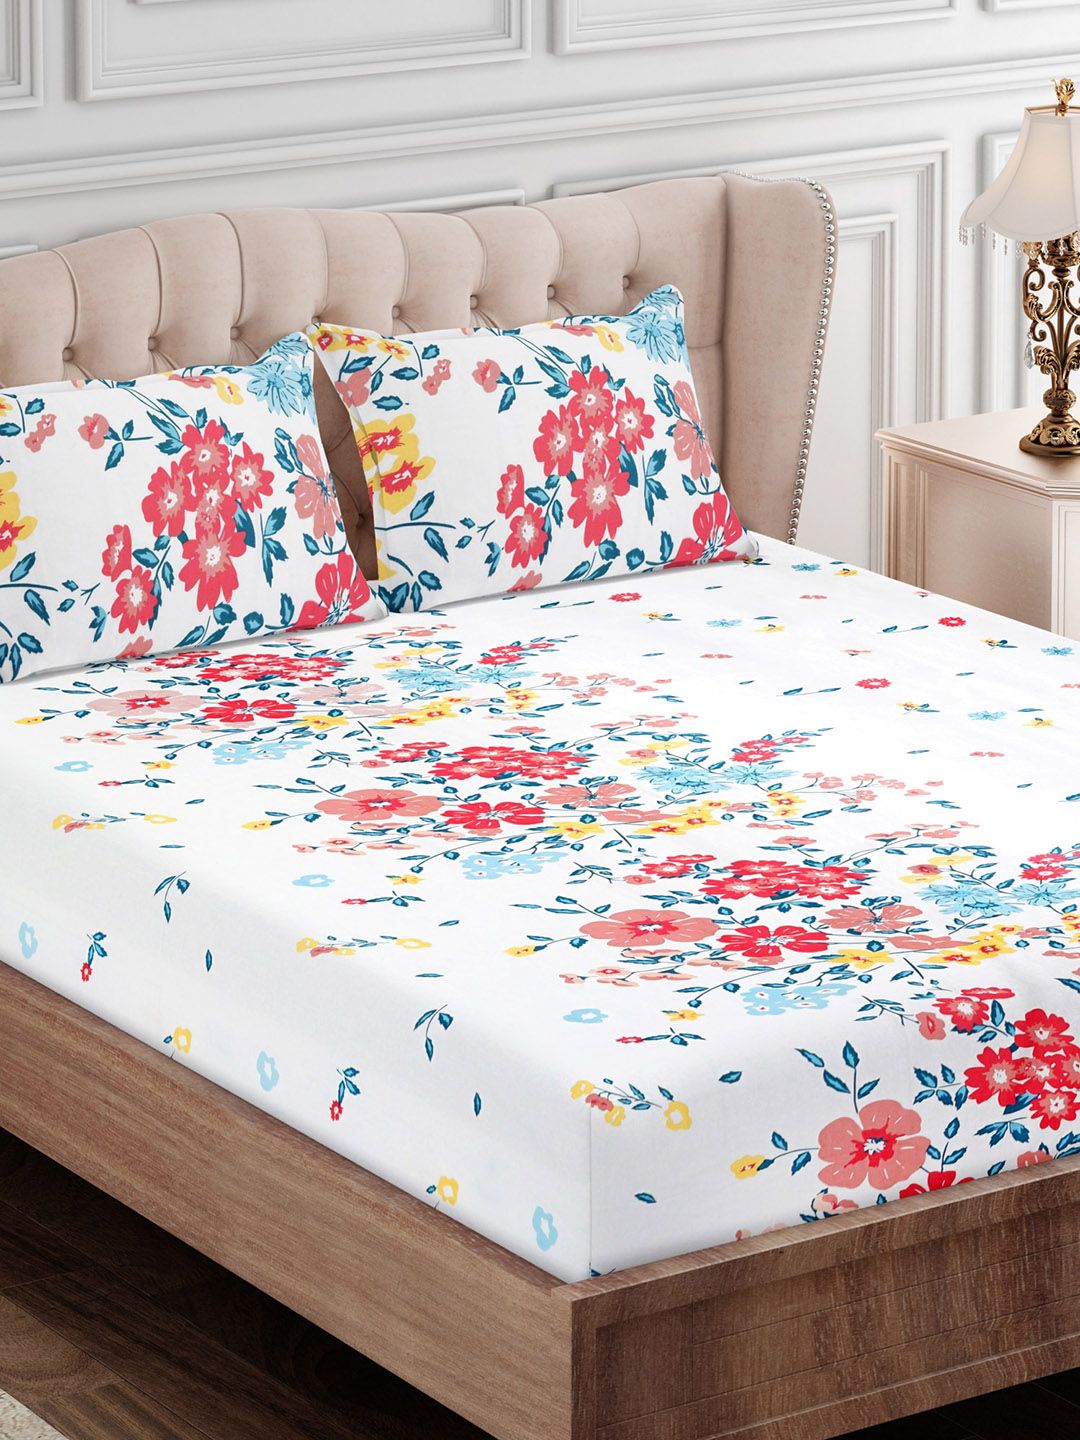 SEJ by Nisha Gupta Pink & White Floral 180 TC King Bedsheet with 2 Pillow Covers Price in India